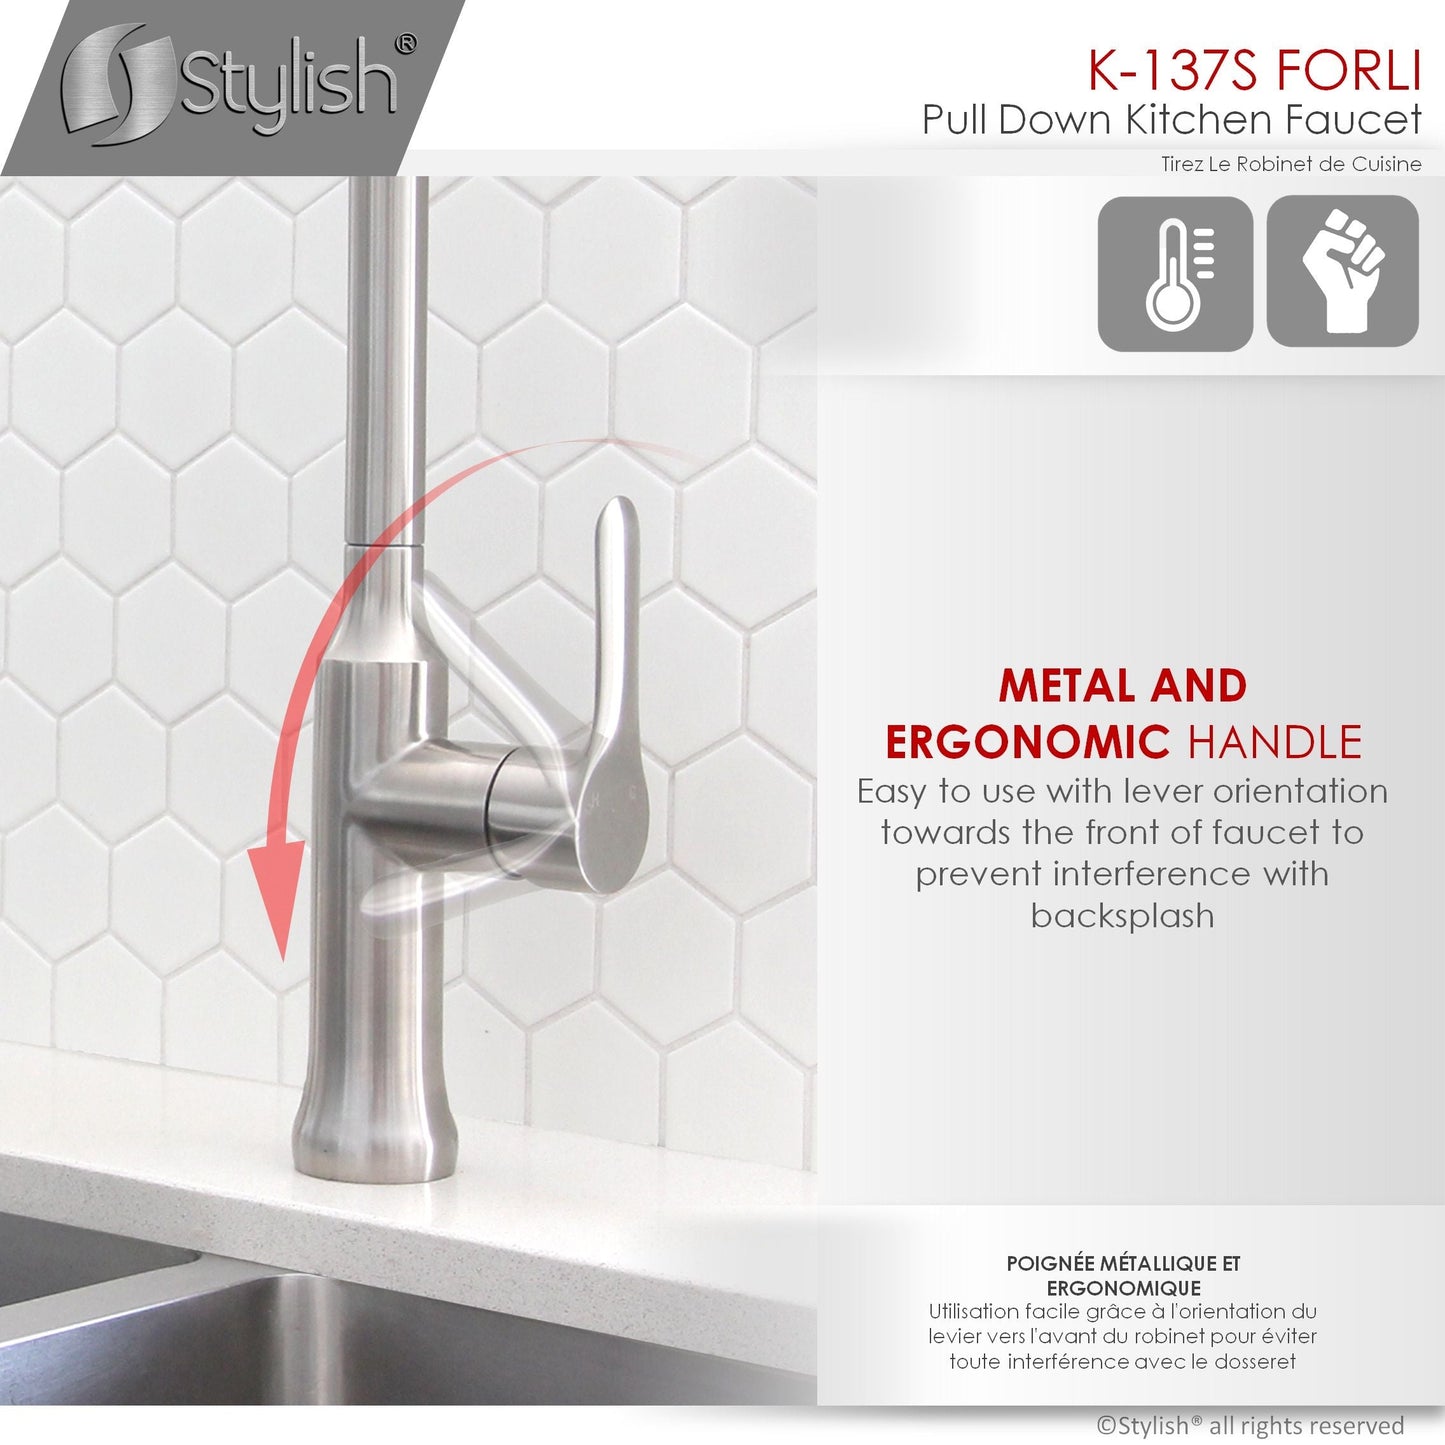 Stylish Forli 18.5" Kitchen Faucet Single Handle Pull Down Dual Mode Stainless Steel Brushed Finish K-137S